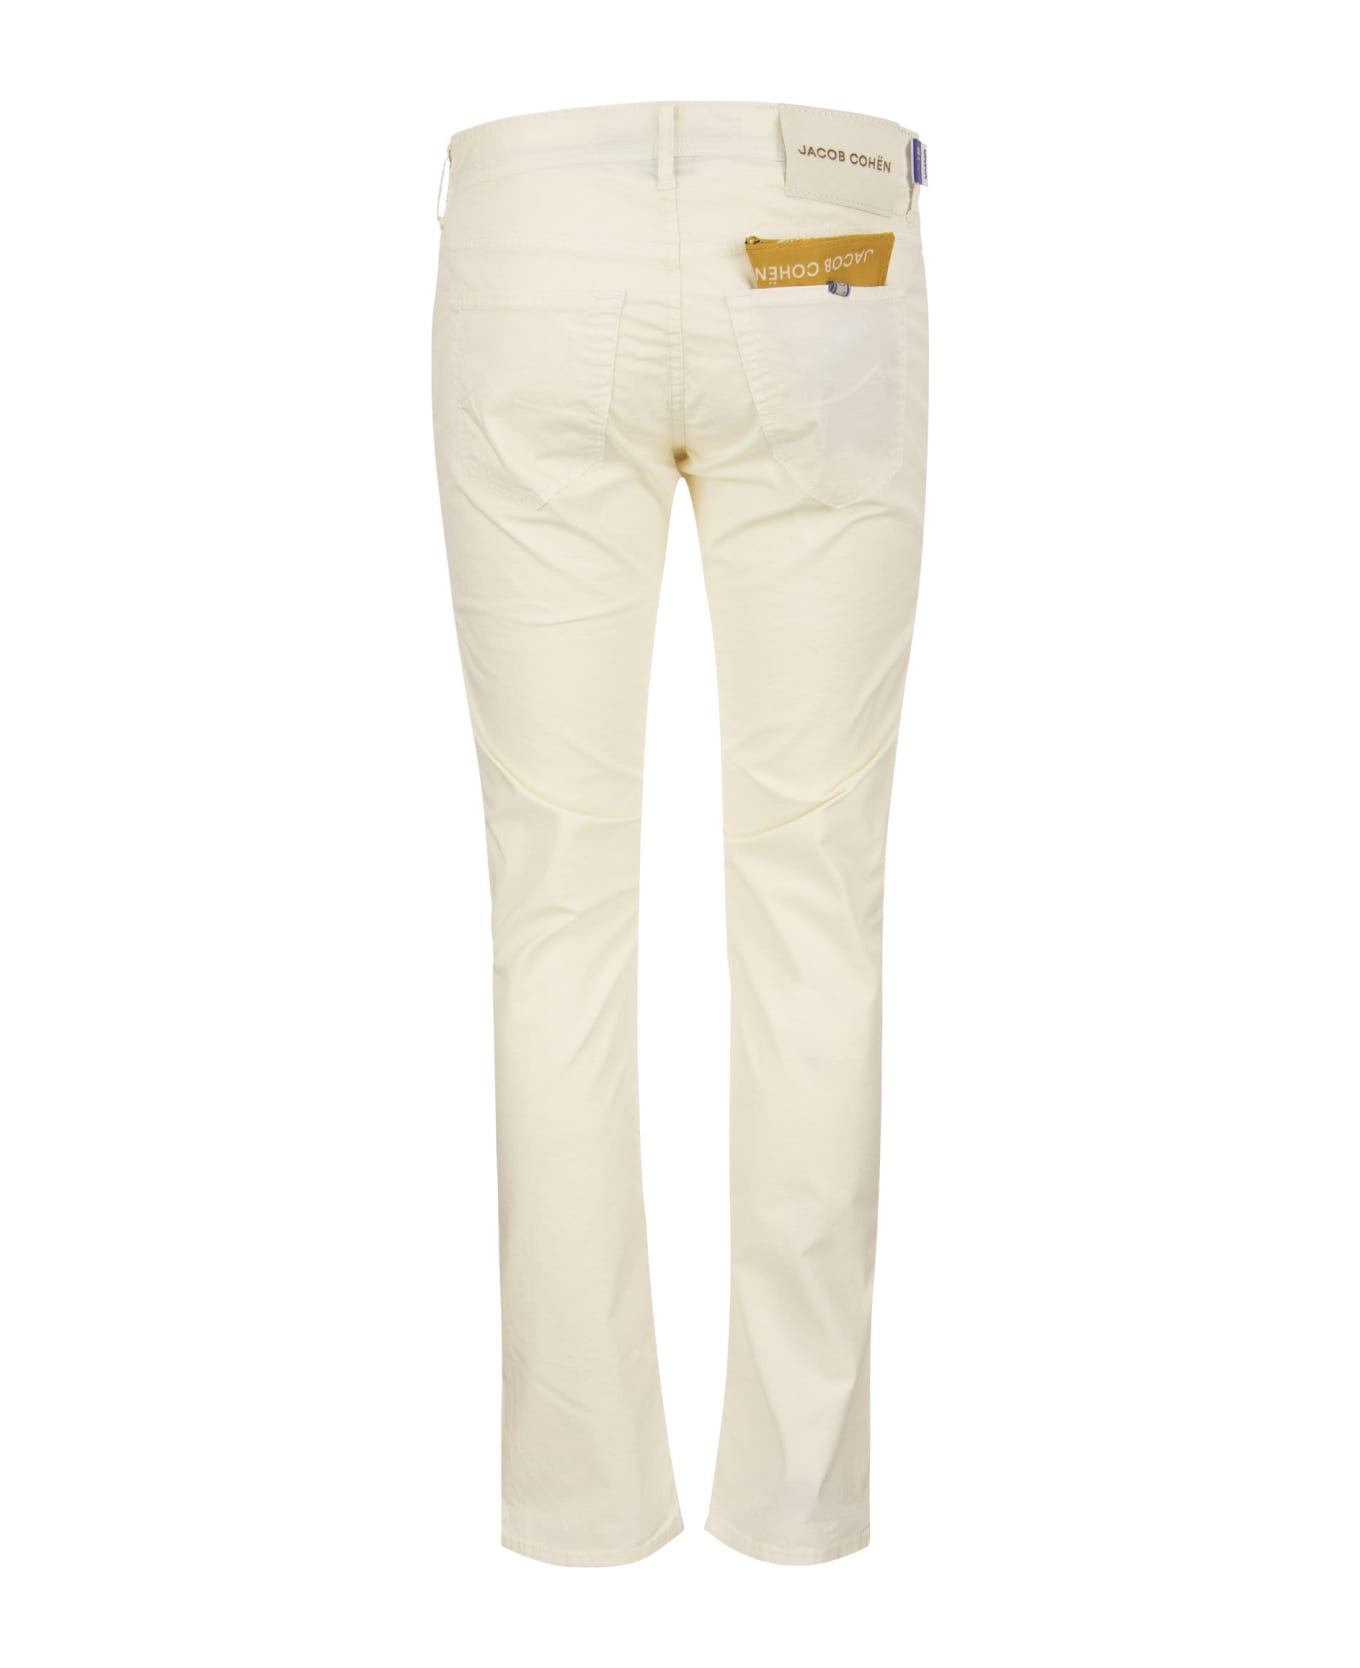 Jacob Cohen Five-pocket Jeans Trousers - Cream ボトムス